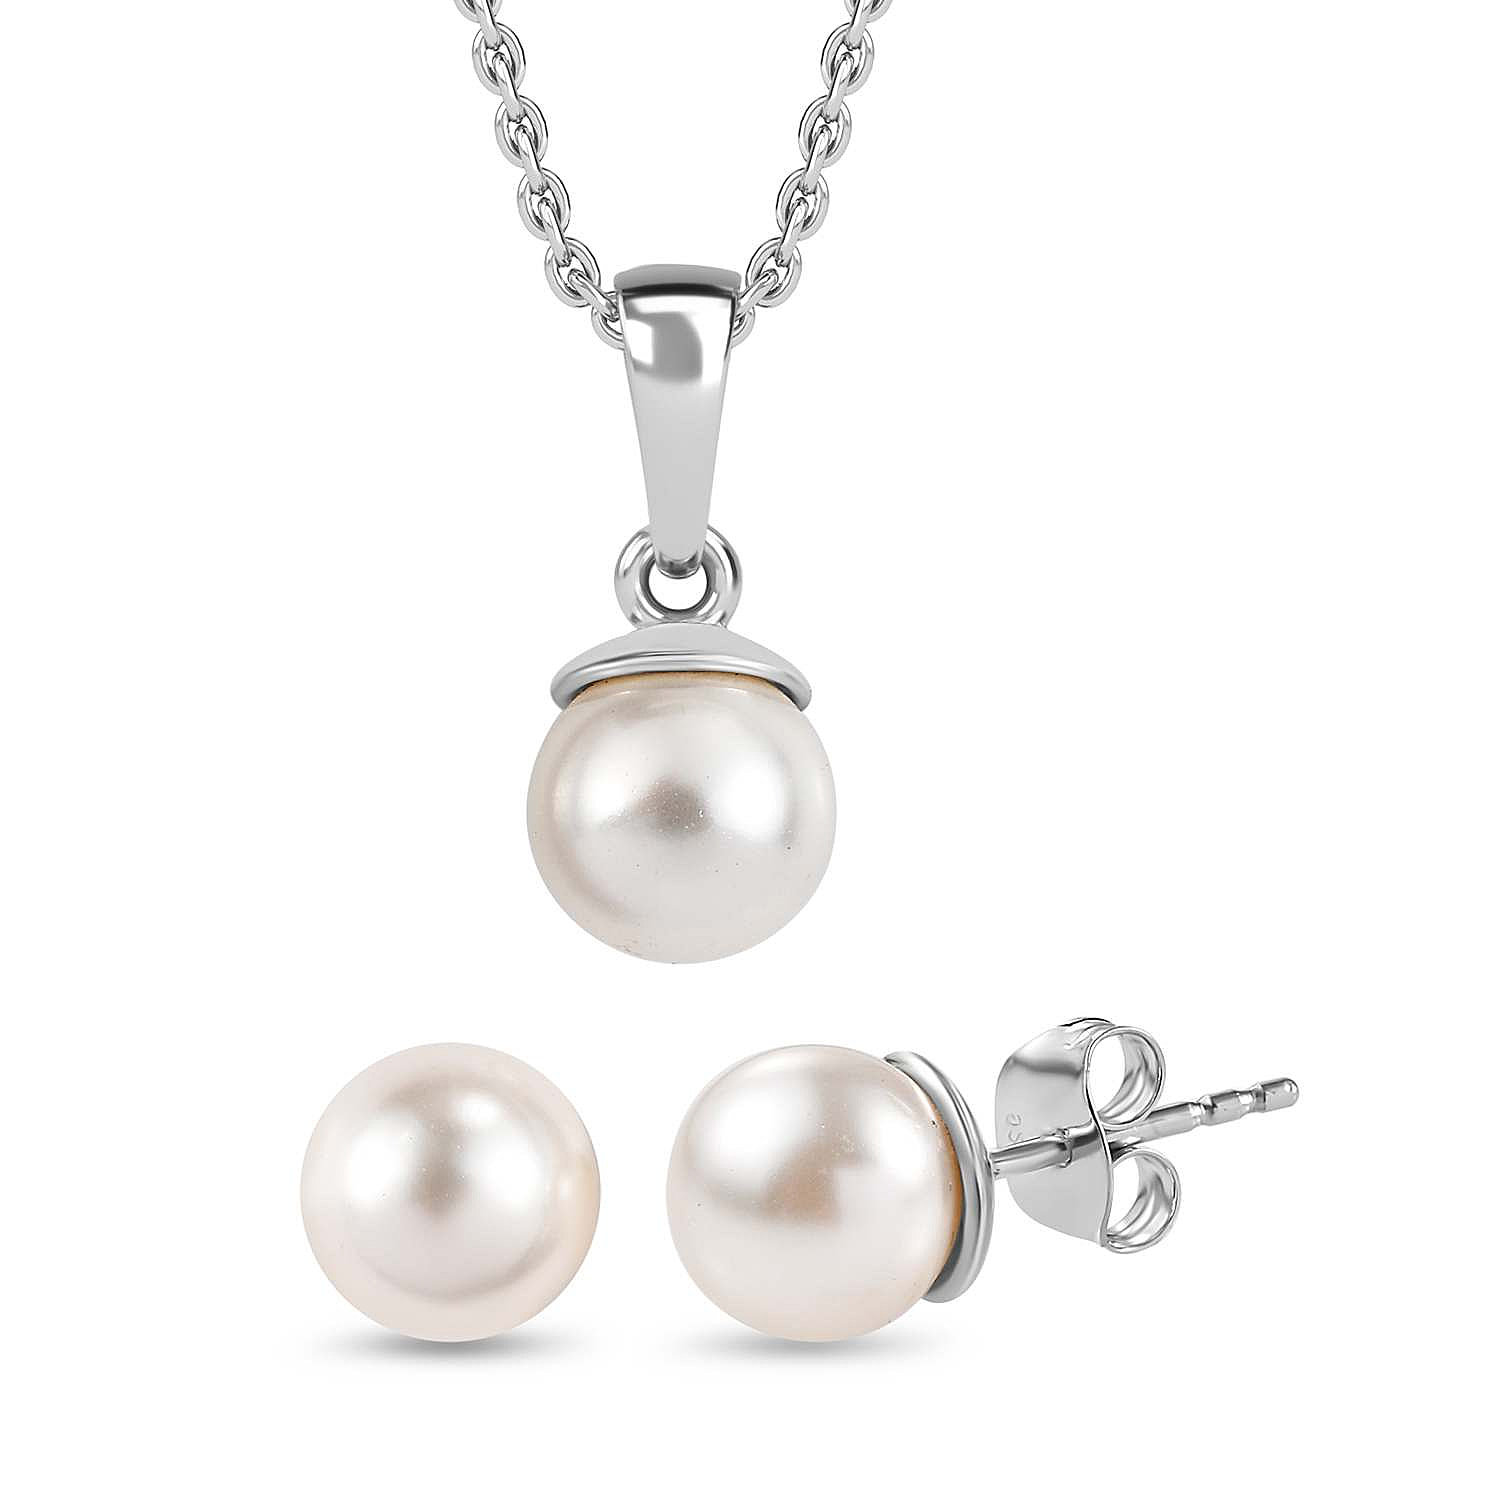 2 Piece Set - White Pearl Finest Austrian Crystal Earrings & Pendant with Chain (Size 20) in Platinum Overlay Sterling Silver